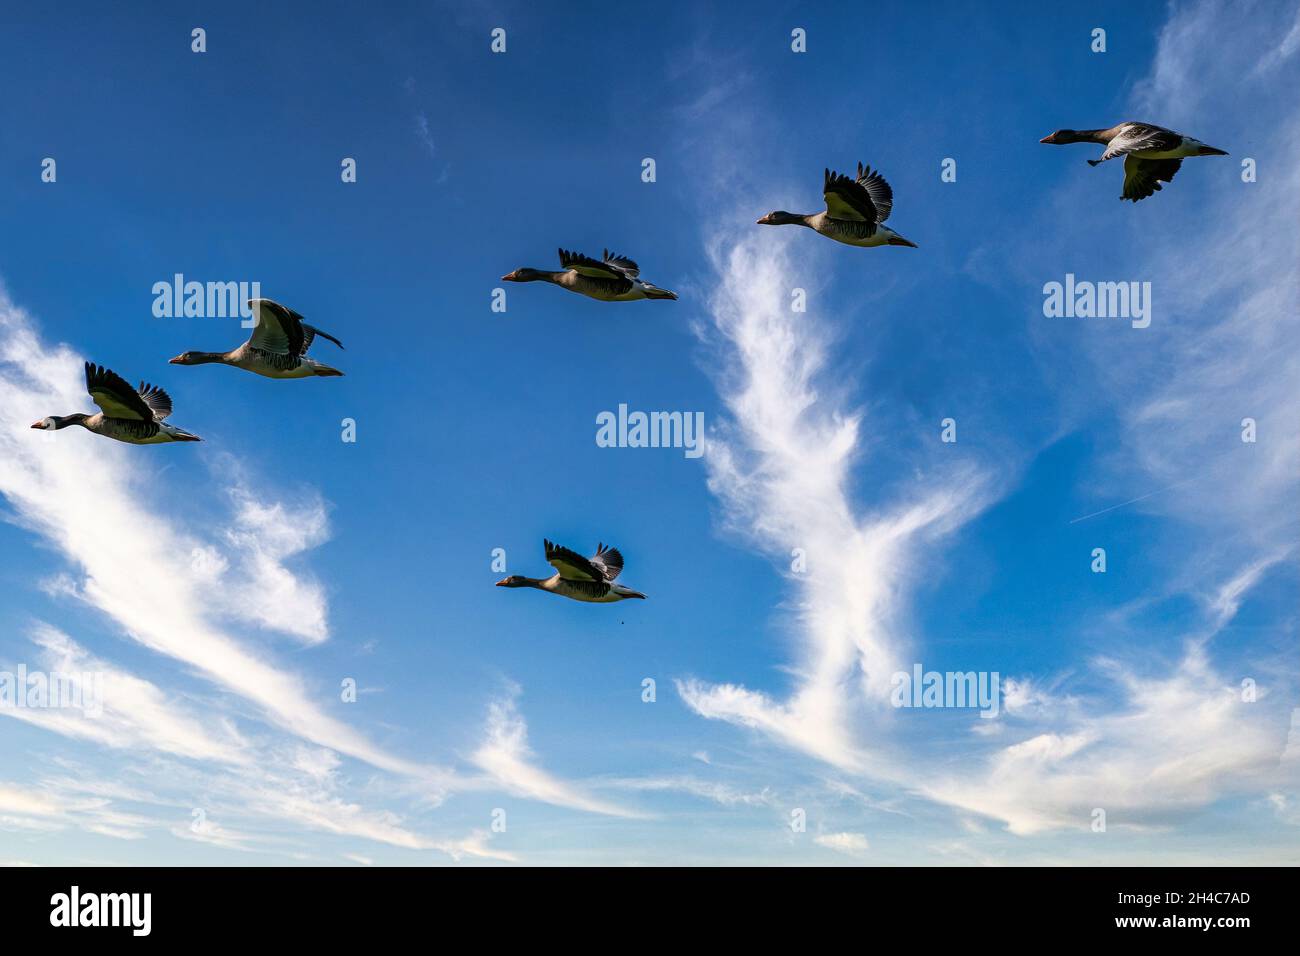 Flock detailed Geese flying in a beautiful blue sky. birds flying in the shape of. Animal themes, background, copy-space. Stock Photo